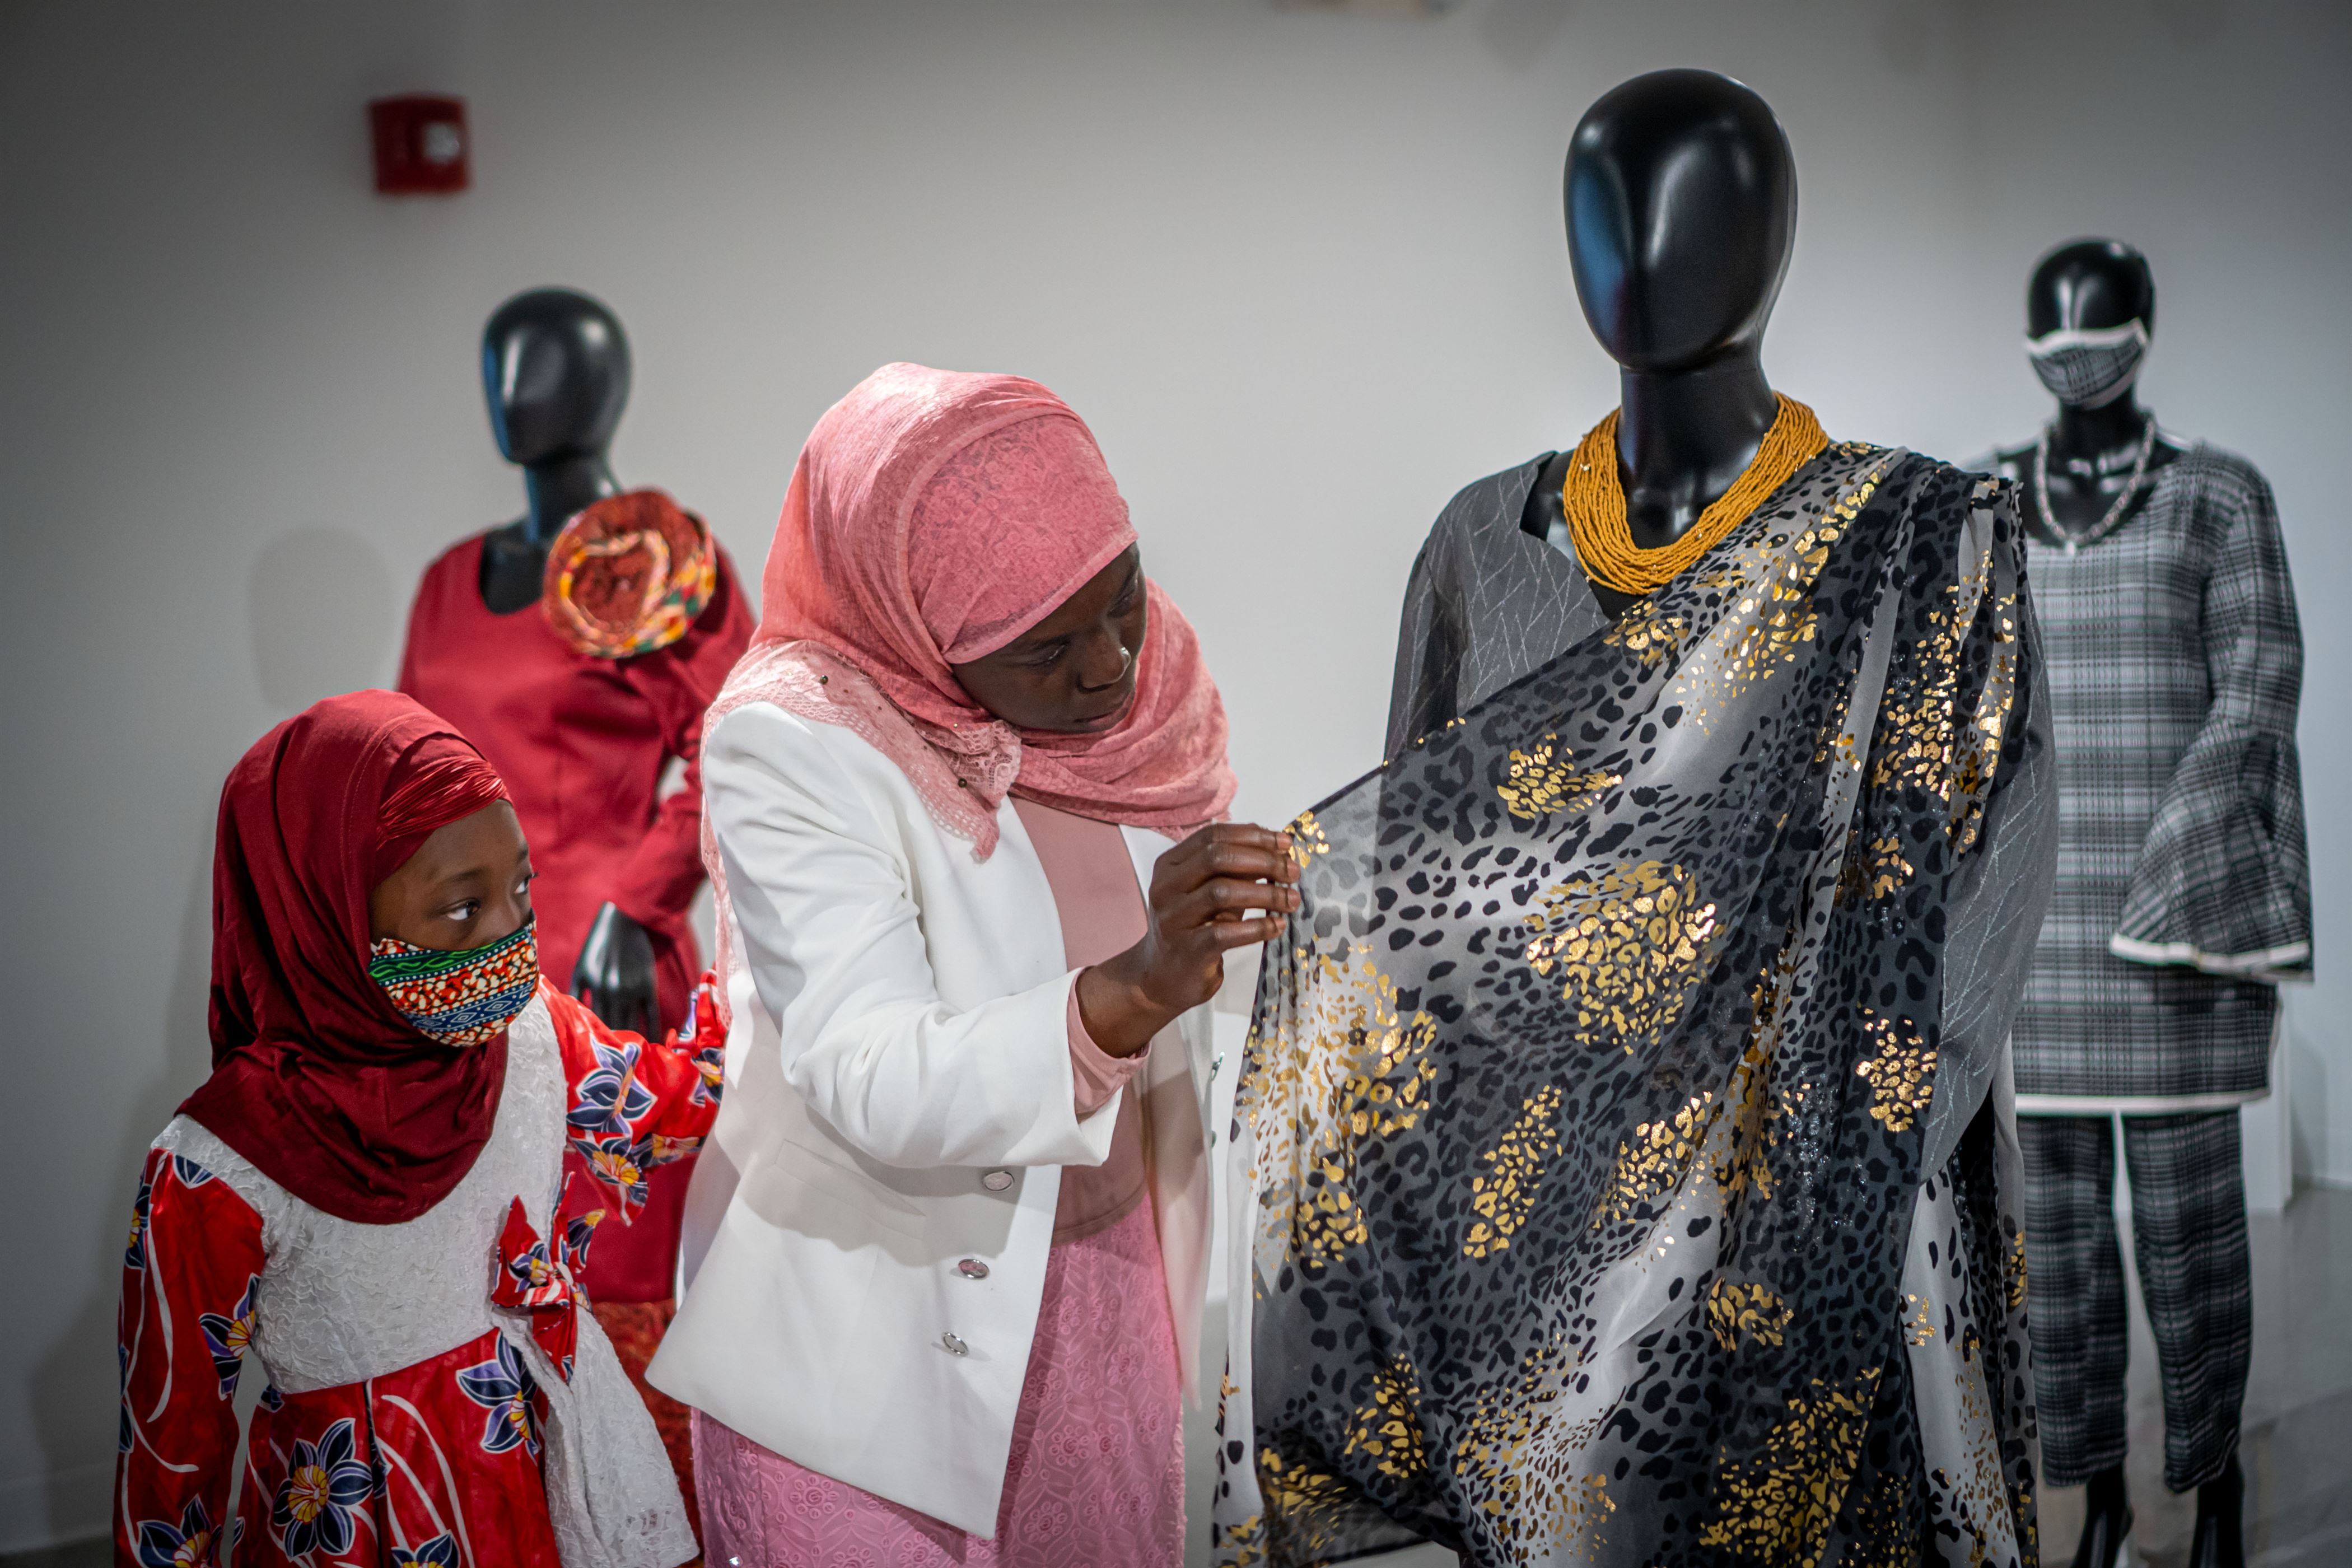 (From left to right): Nazeeha, Saphiatou Akondo's daughter, Saphiatou Akondo admires one of the looks in the collection. Lynise Olivacce | The Montclarion